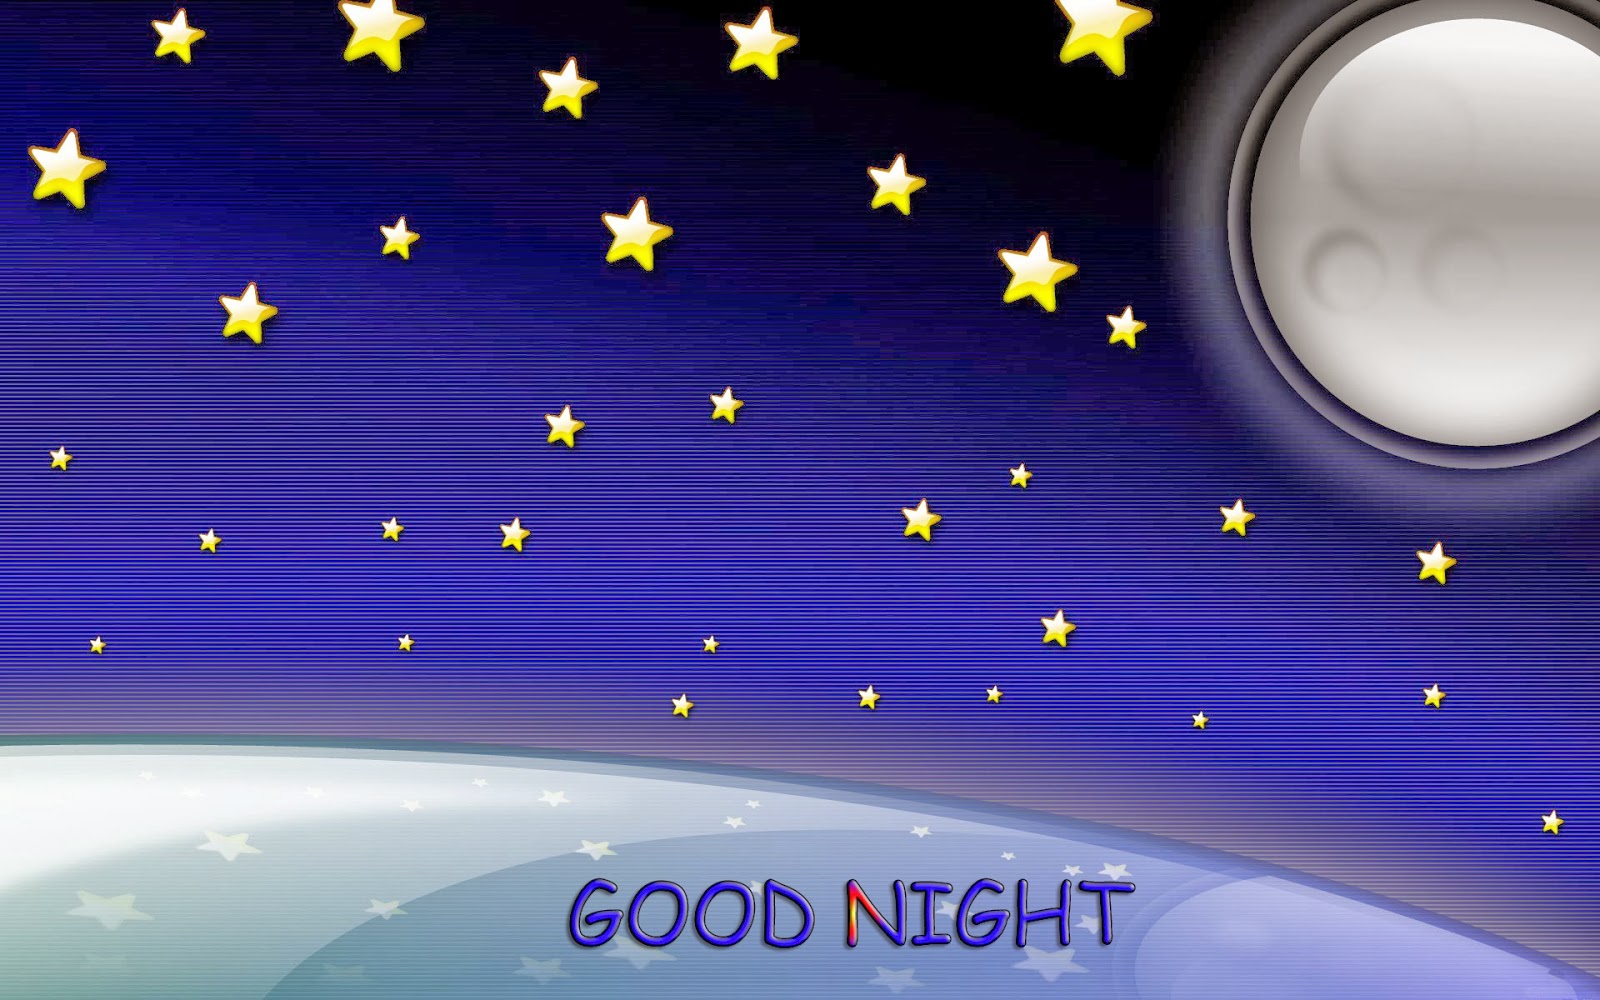 good night clipart free download - photo #22